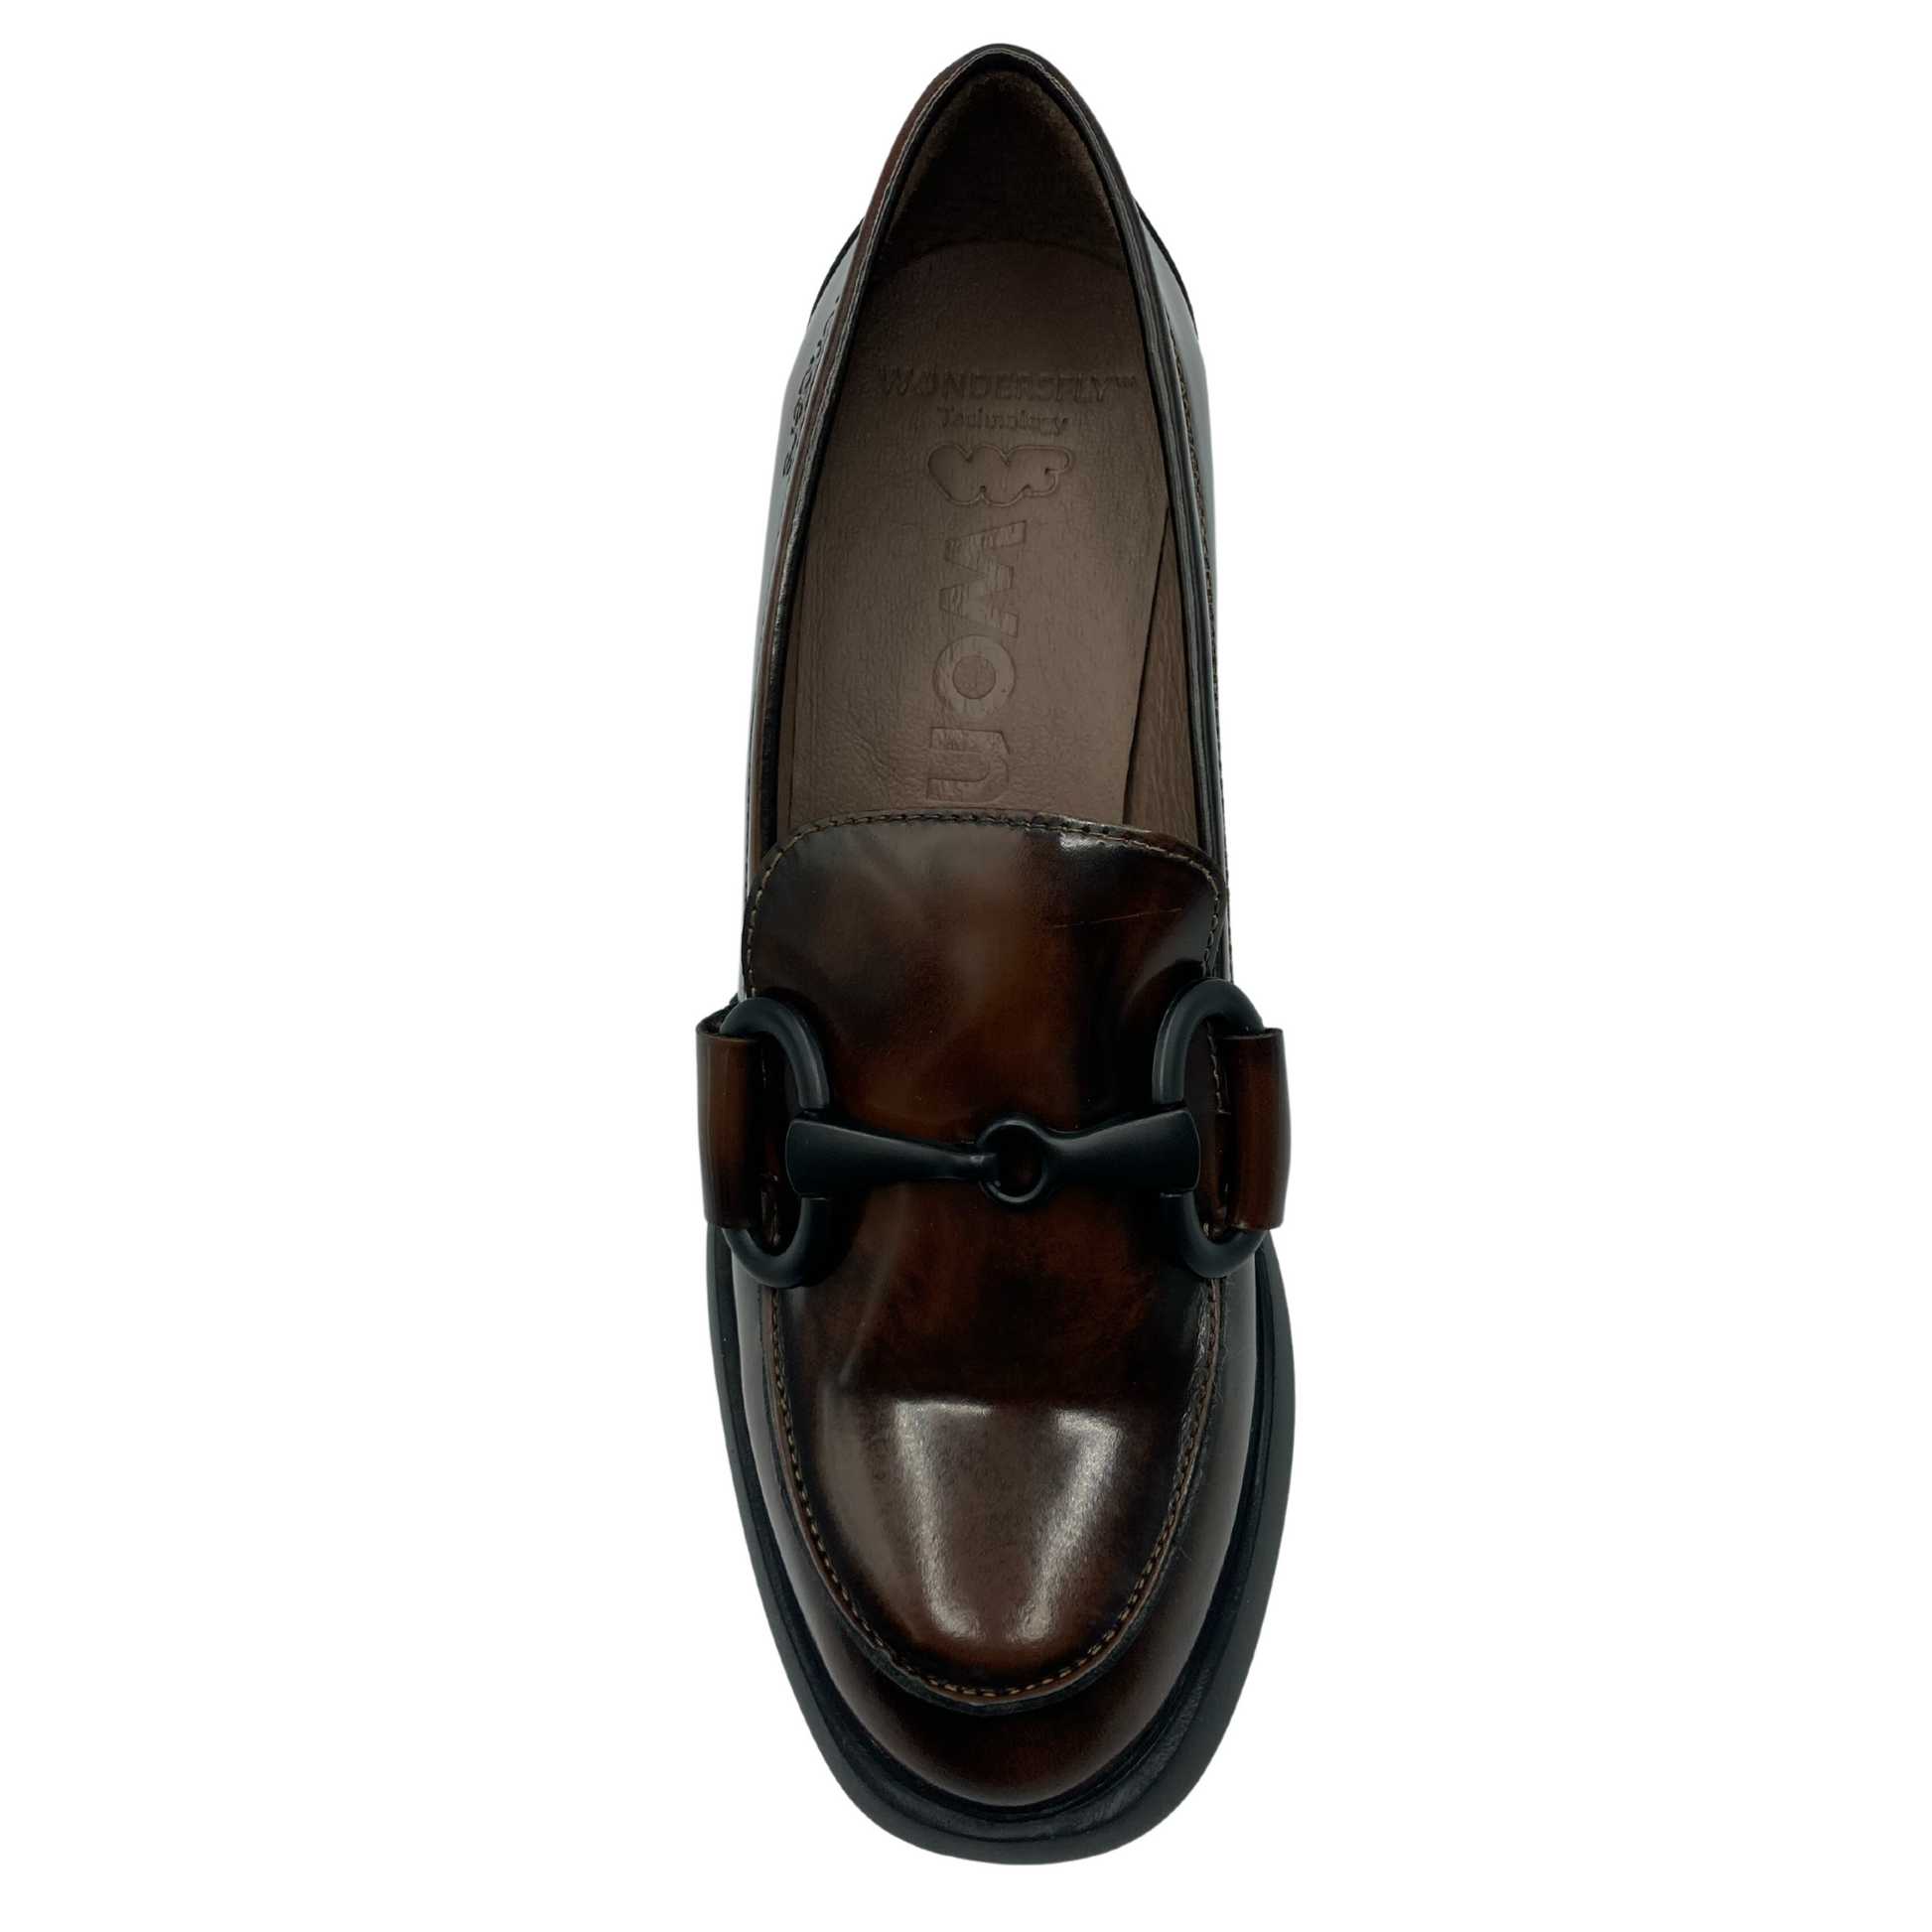 Top down view of glossy loafer with rounded toe and taupe coloured lining